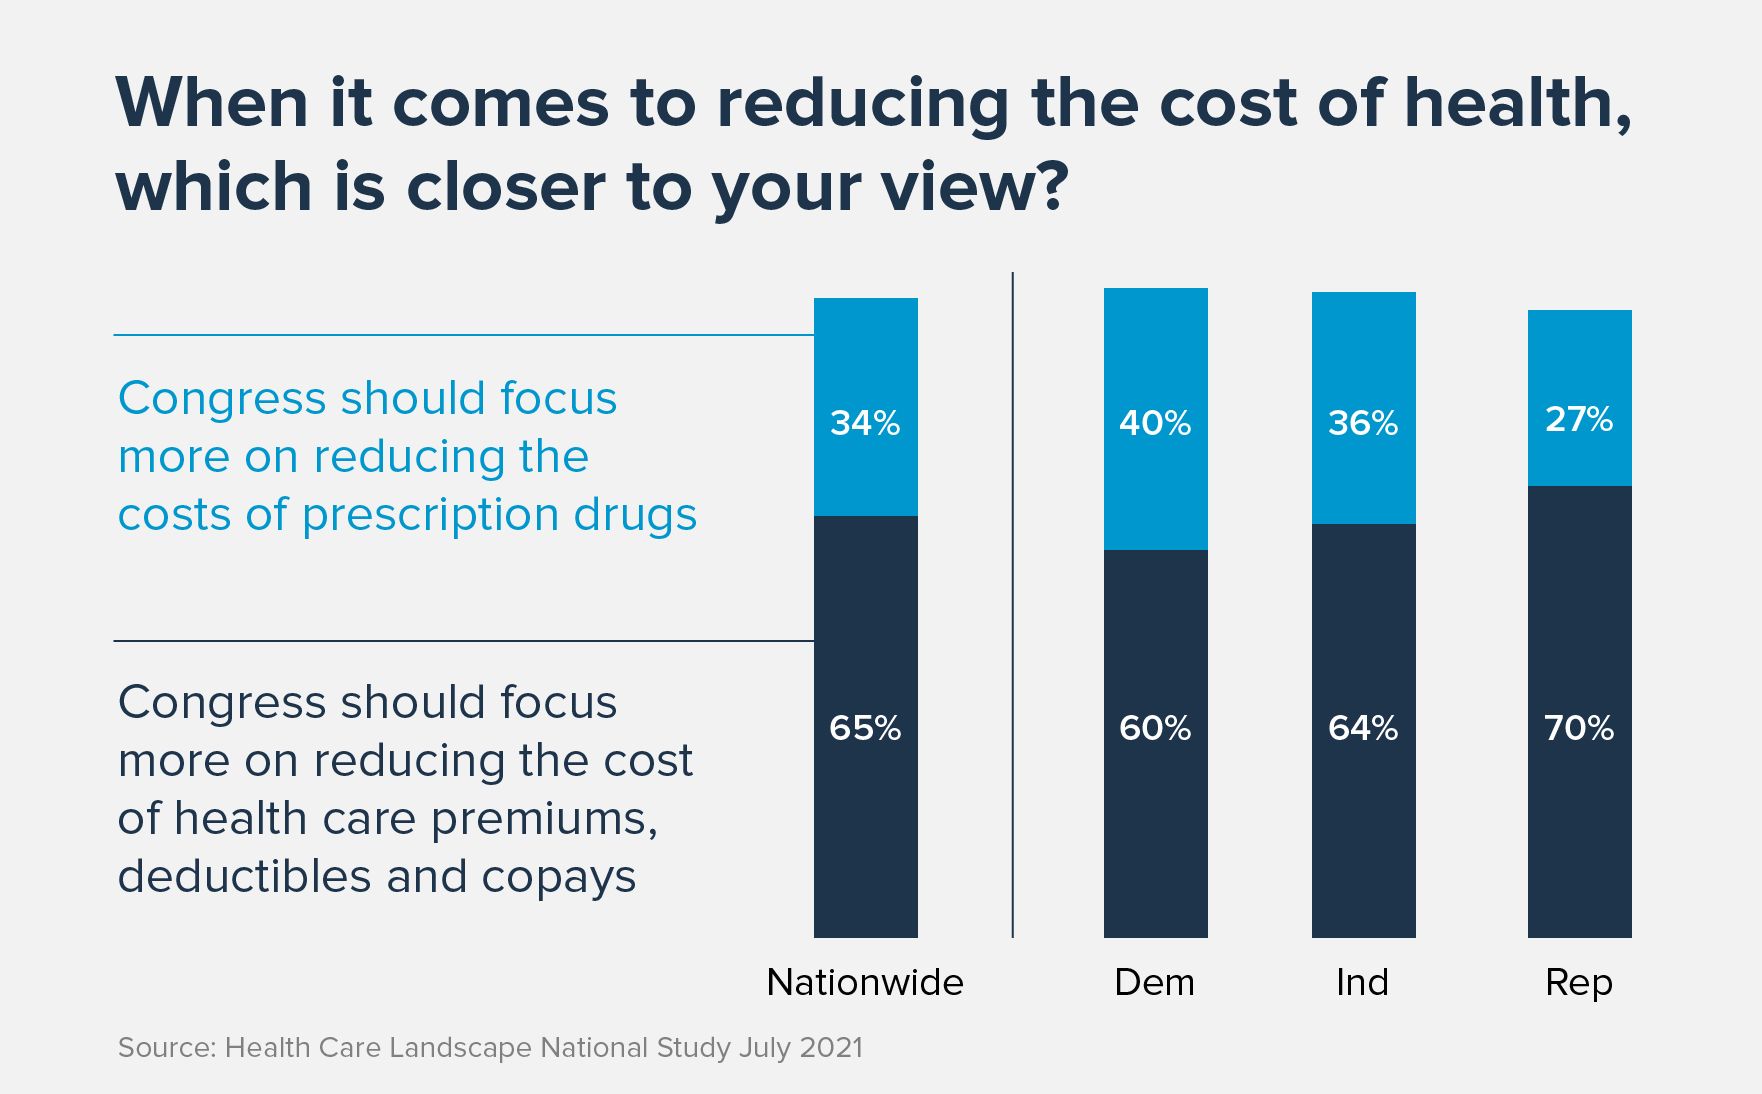 Data show voters want bipartisan approach to tackling health care affordability and coverage issues